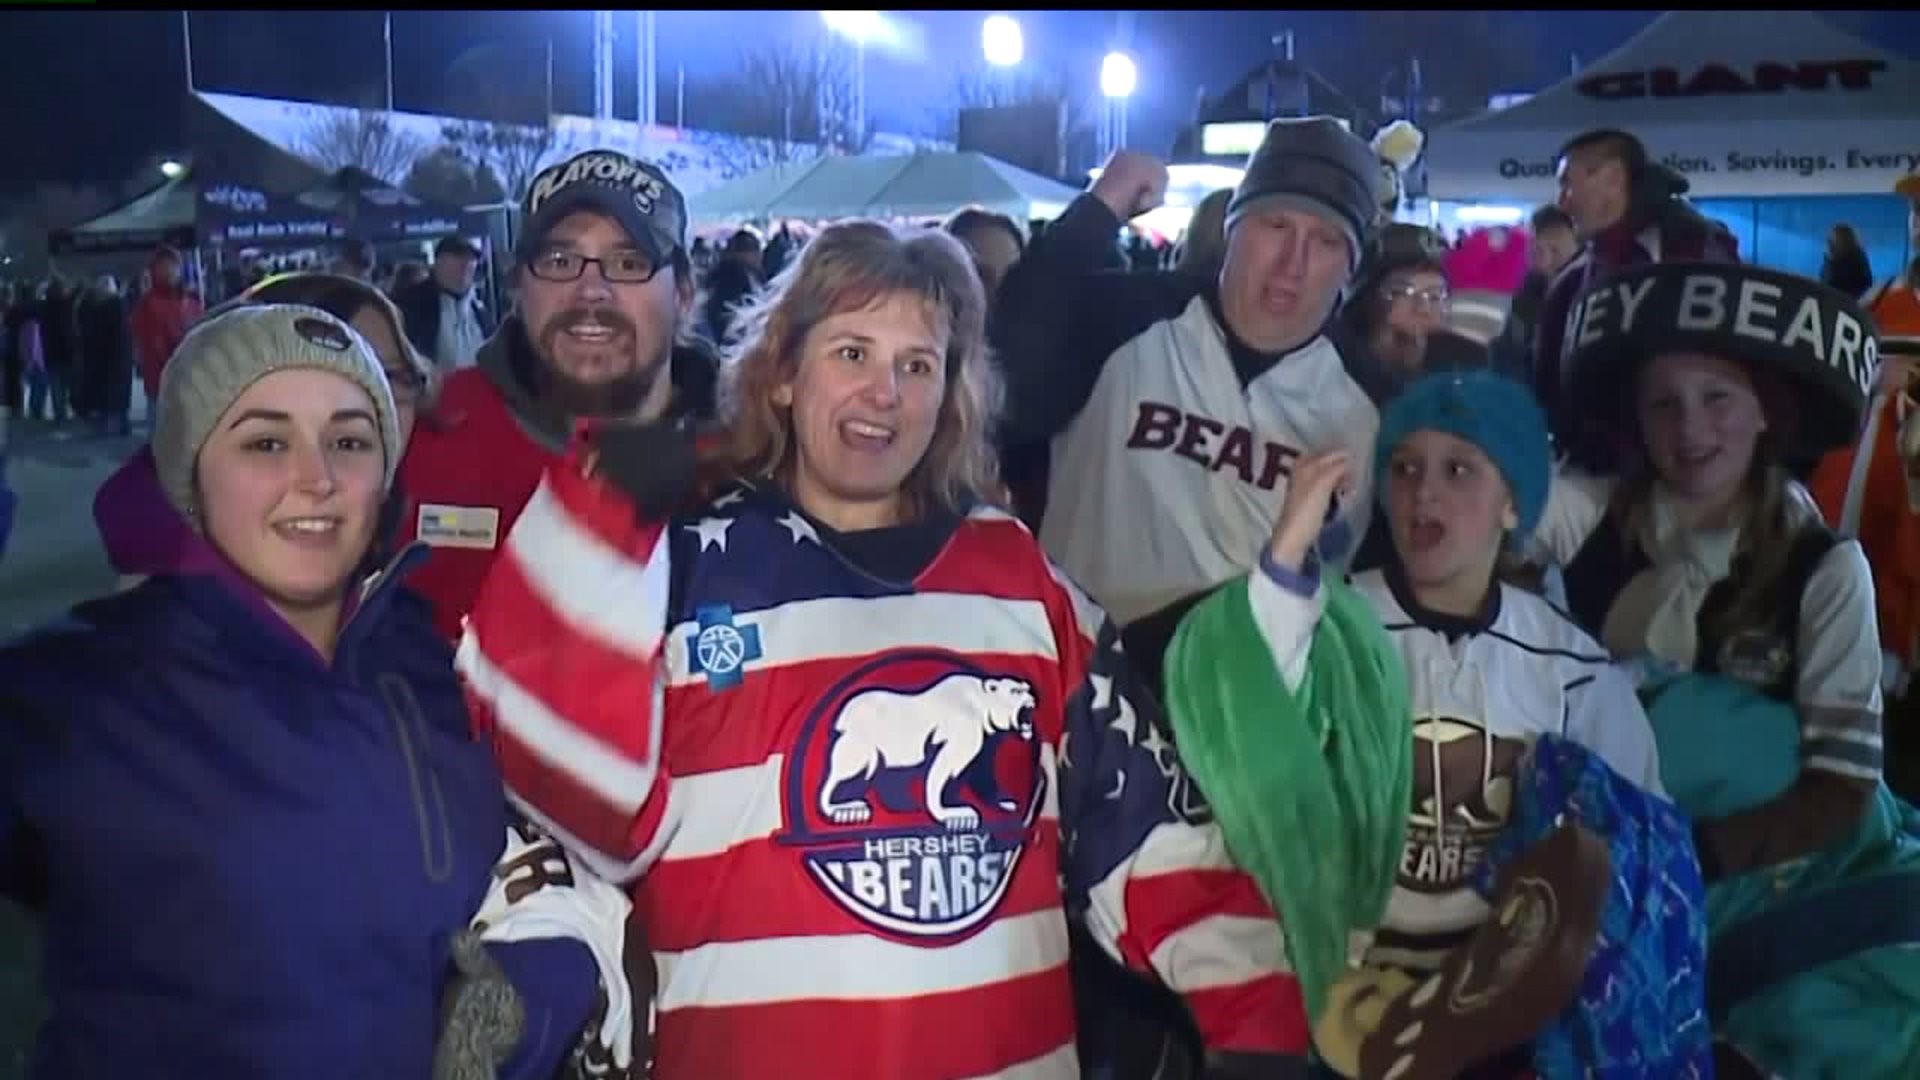 Fans get ready for Outdoor Classic